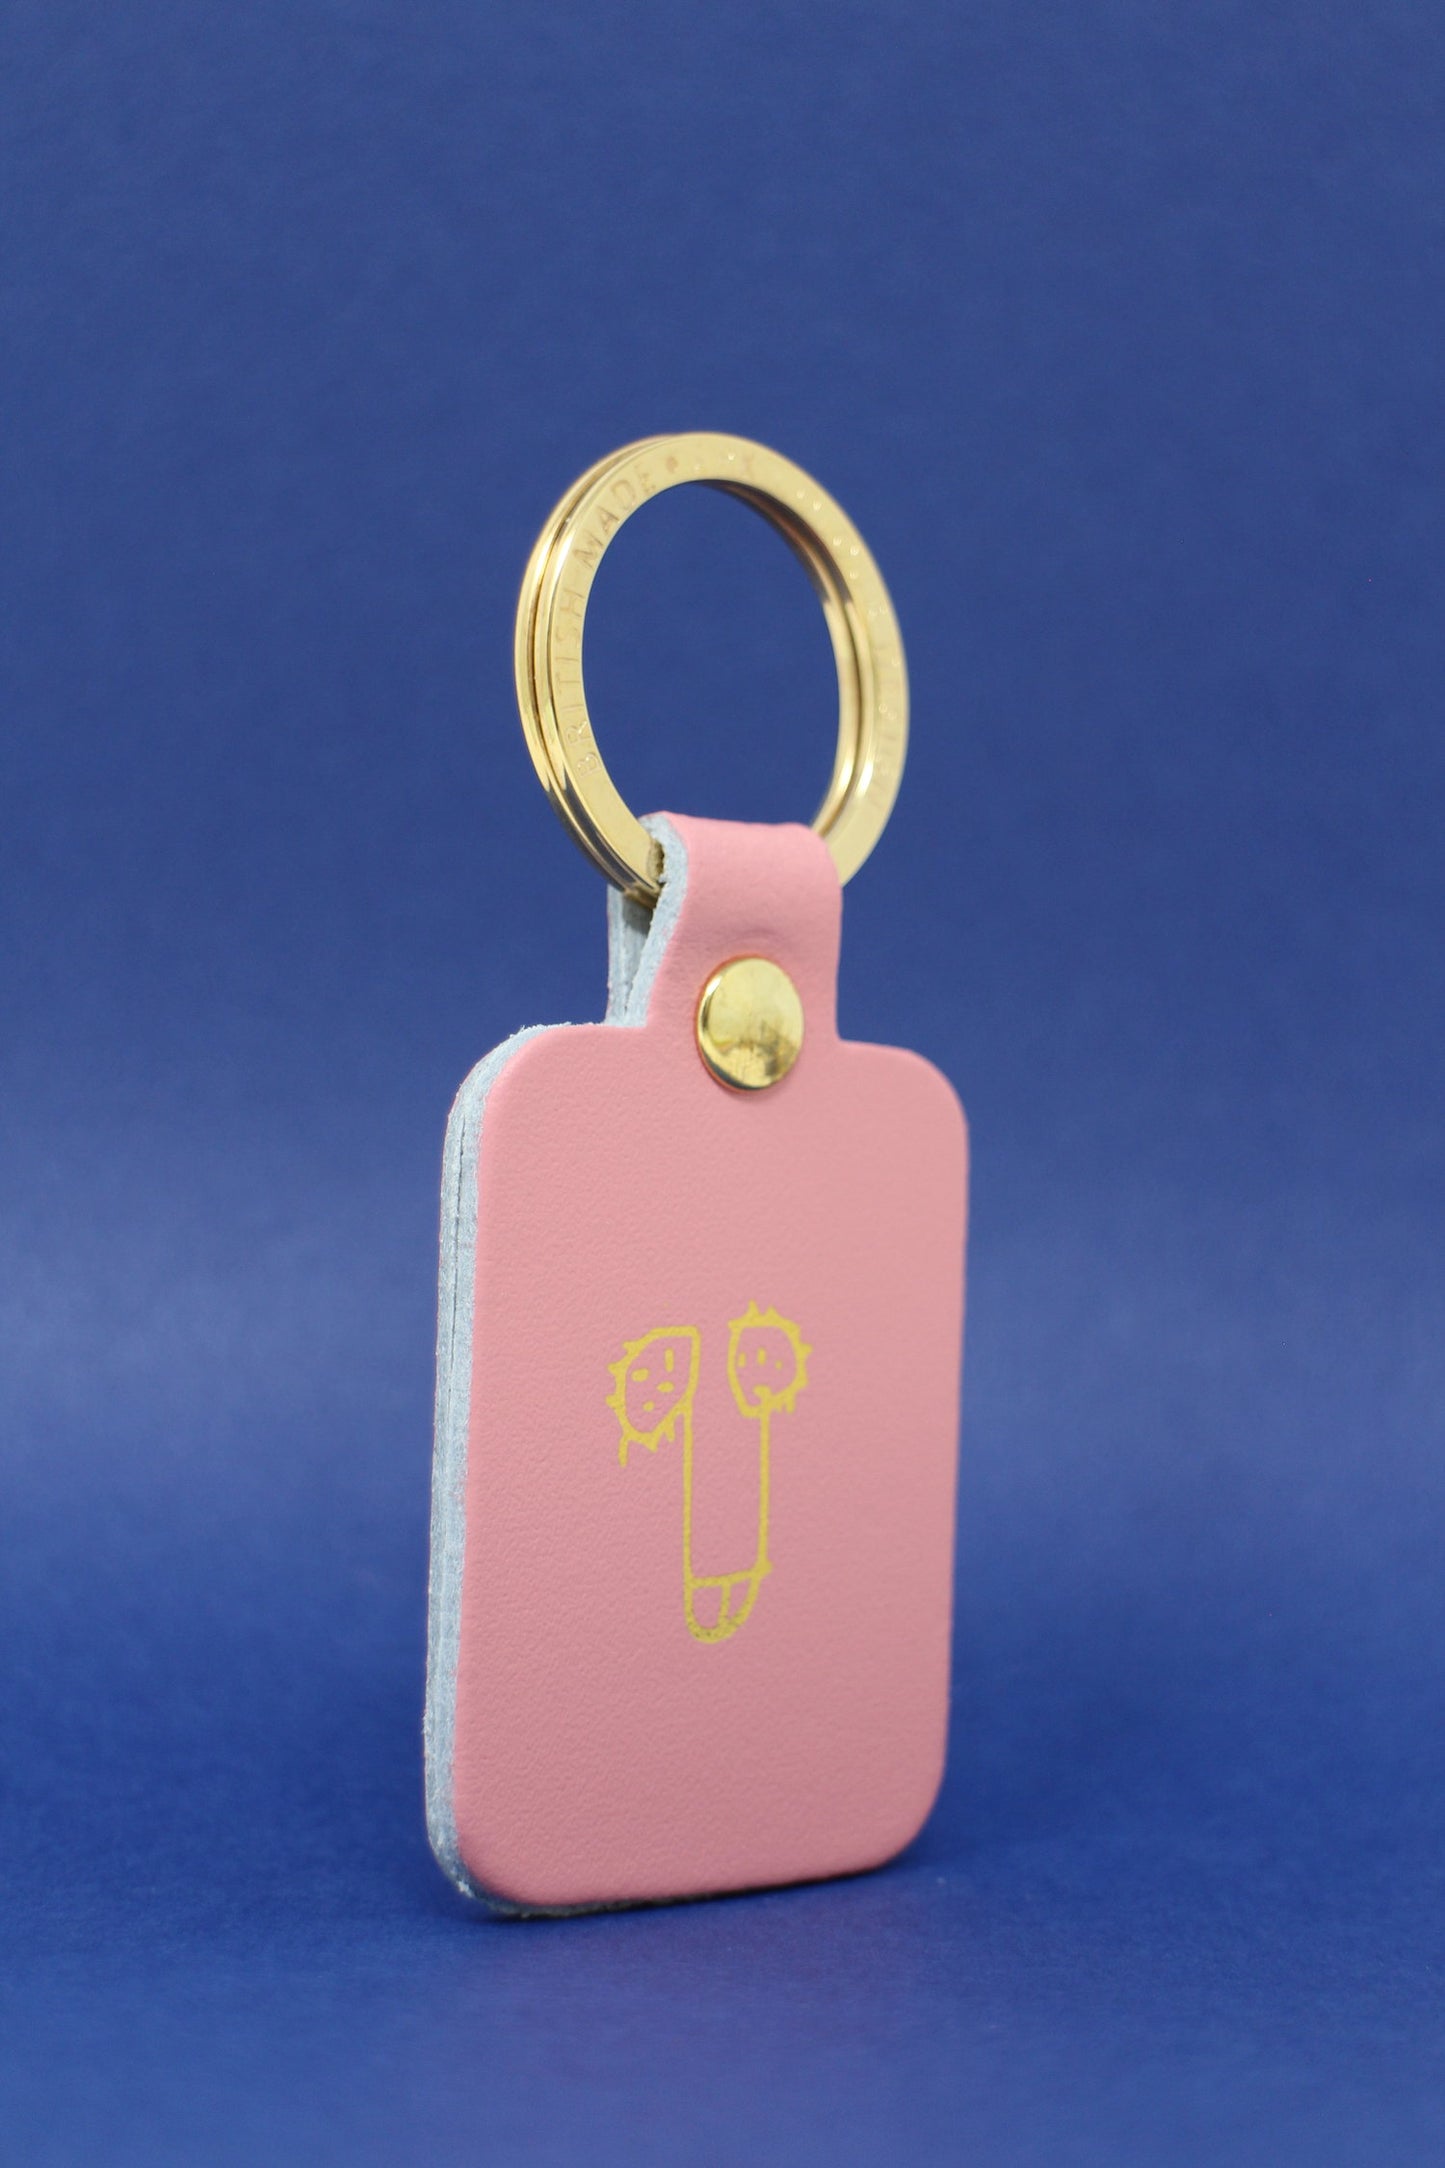 Willy Key Fob Pink